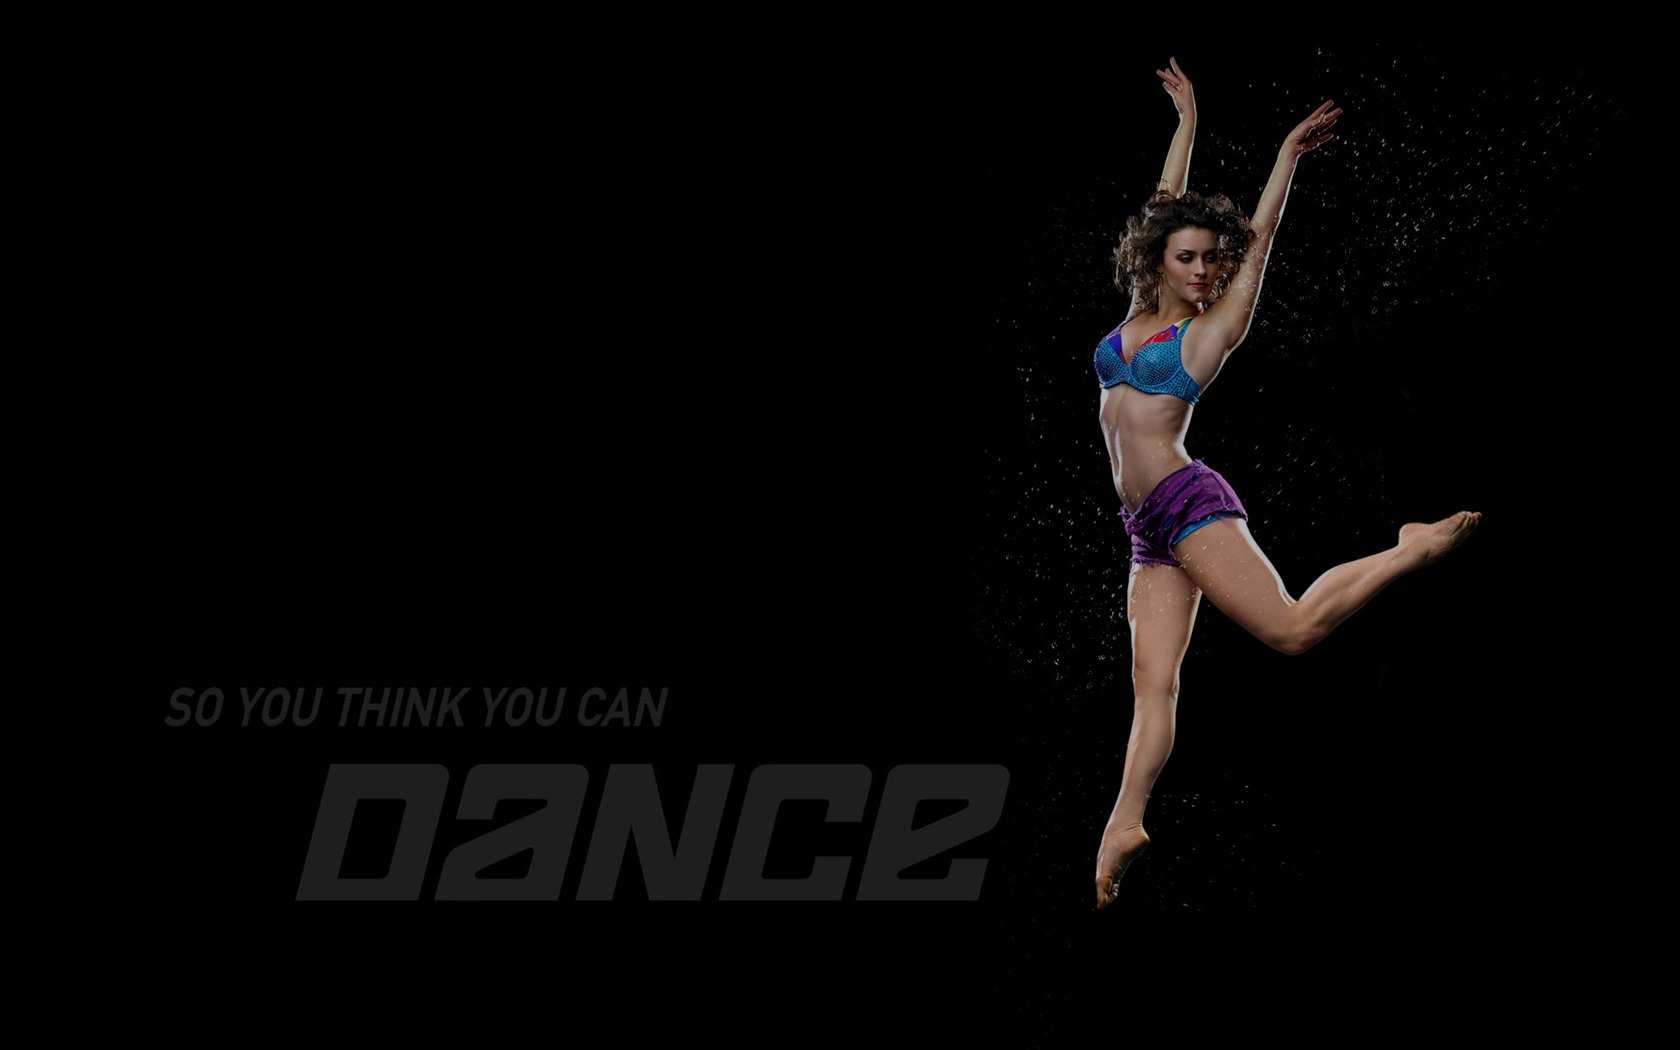 So You Think You Can Dance 舞林爭霸壁紙(二) #5 - 1680x1050